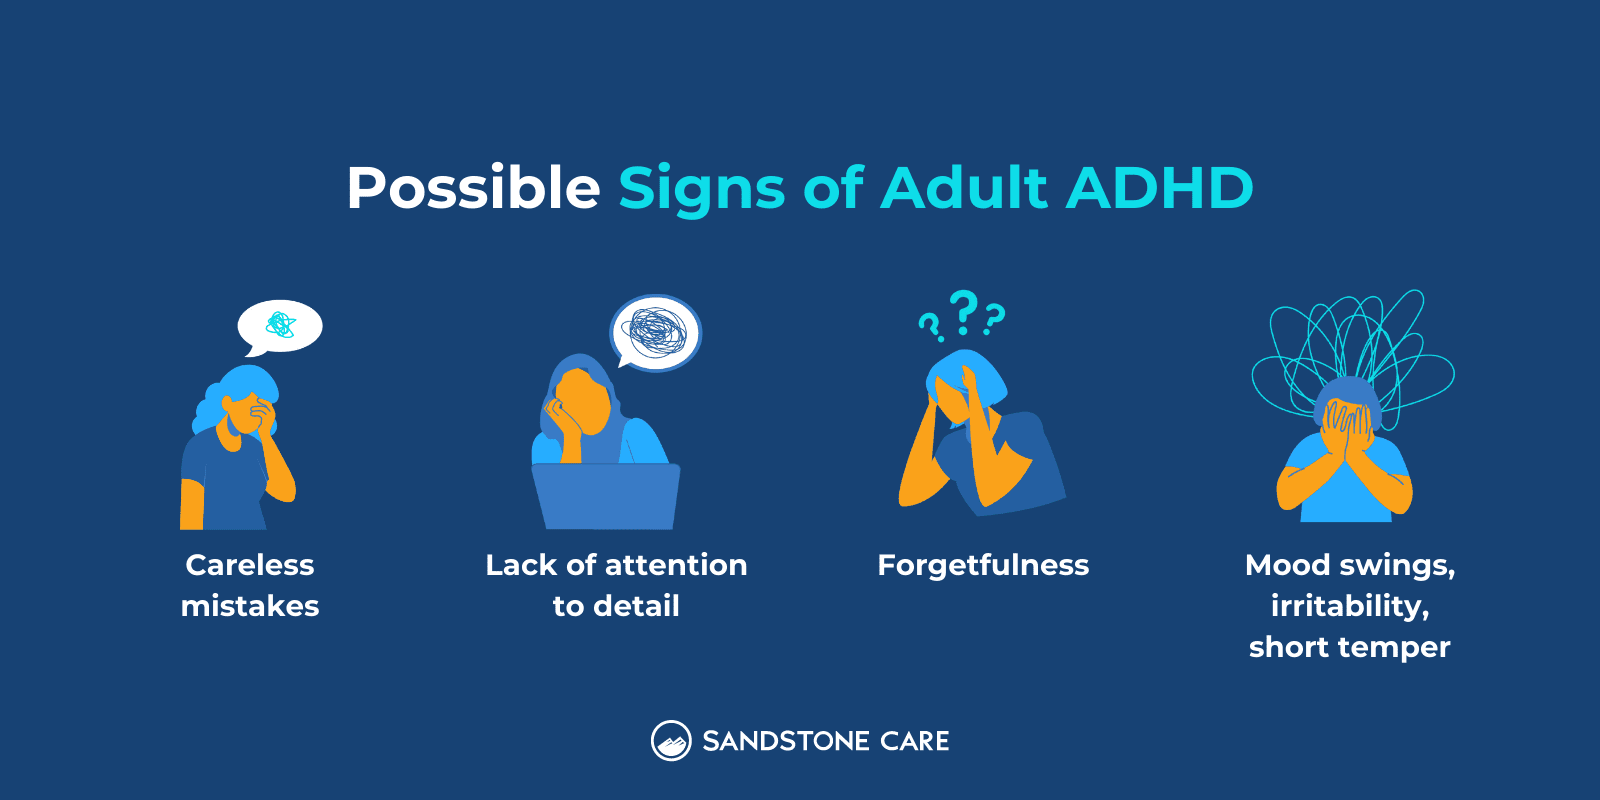 Possible Signs of Adult ADHD are listed with digital illustrations